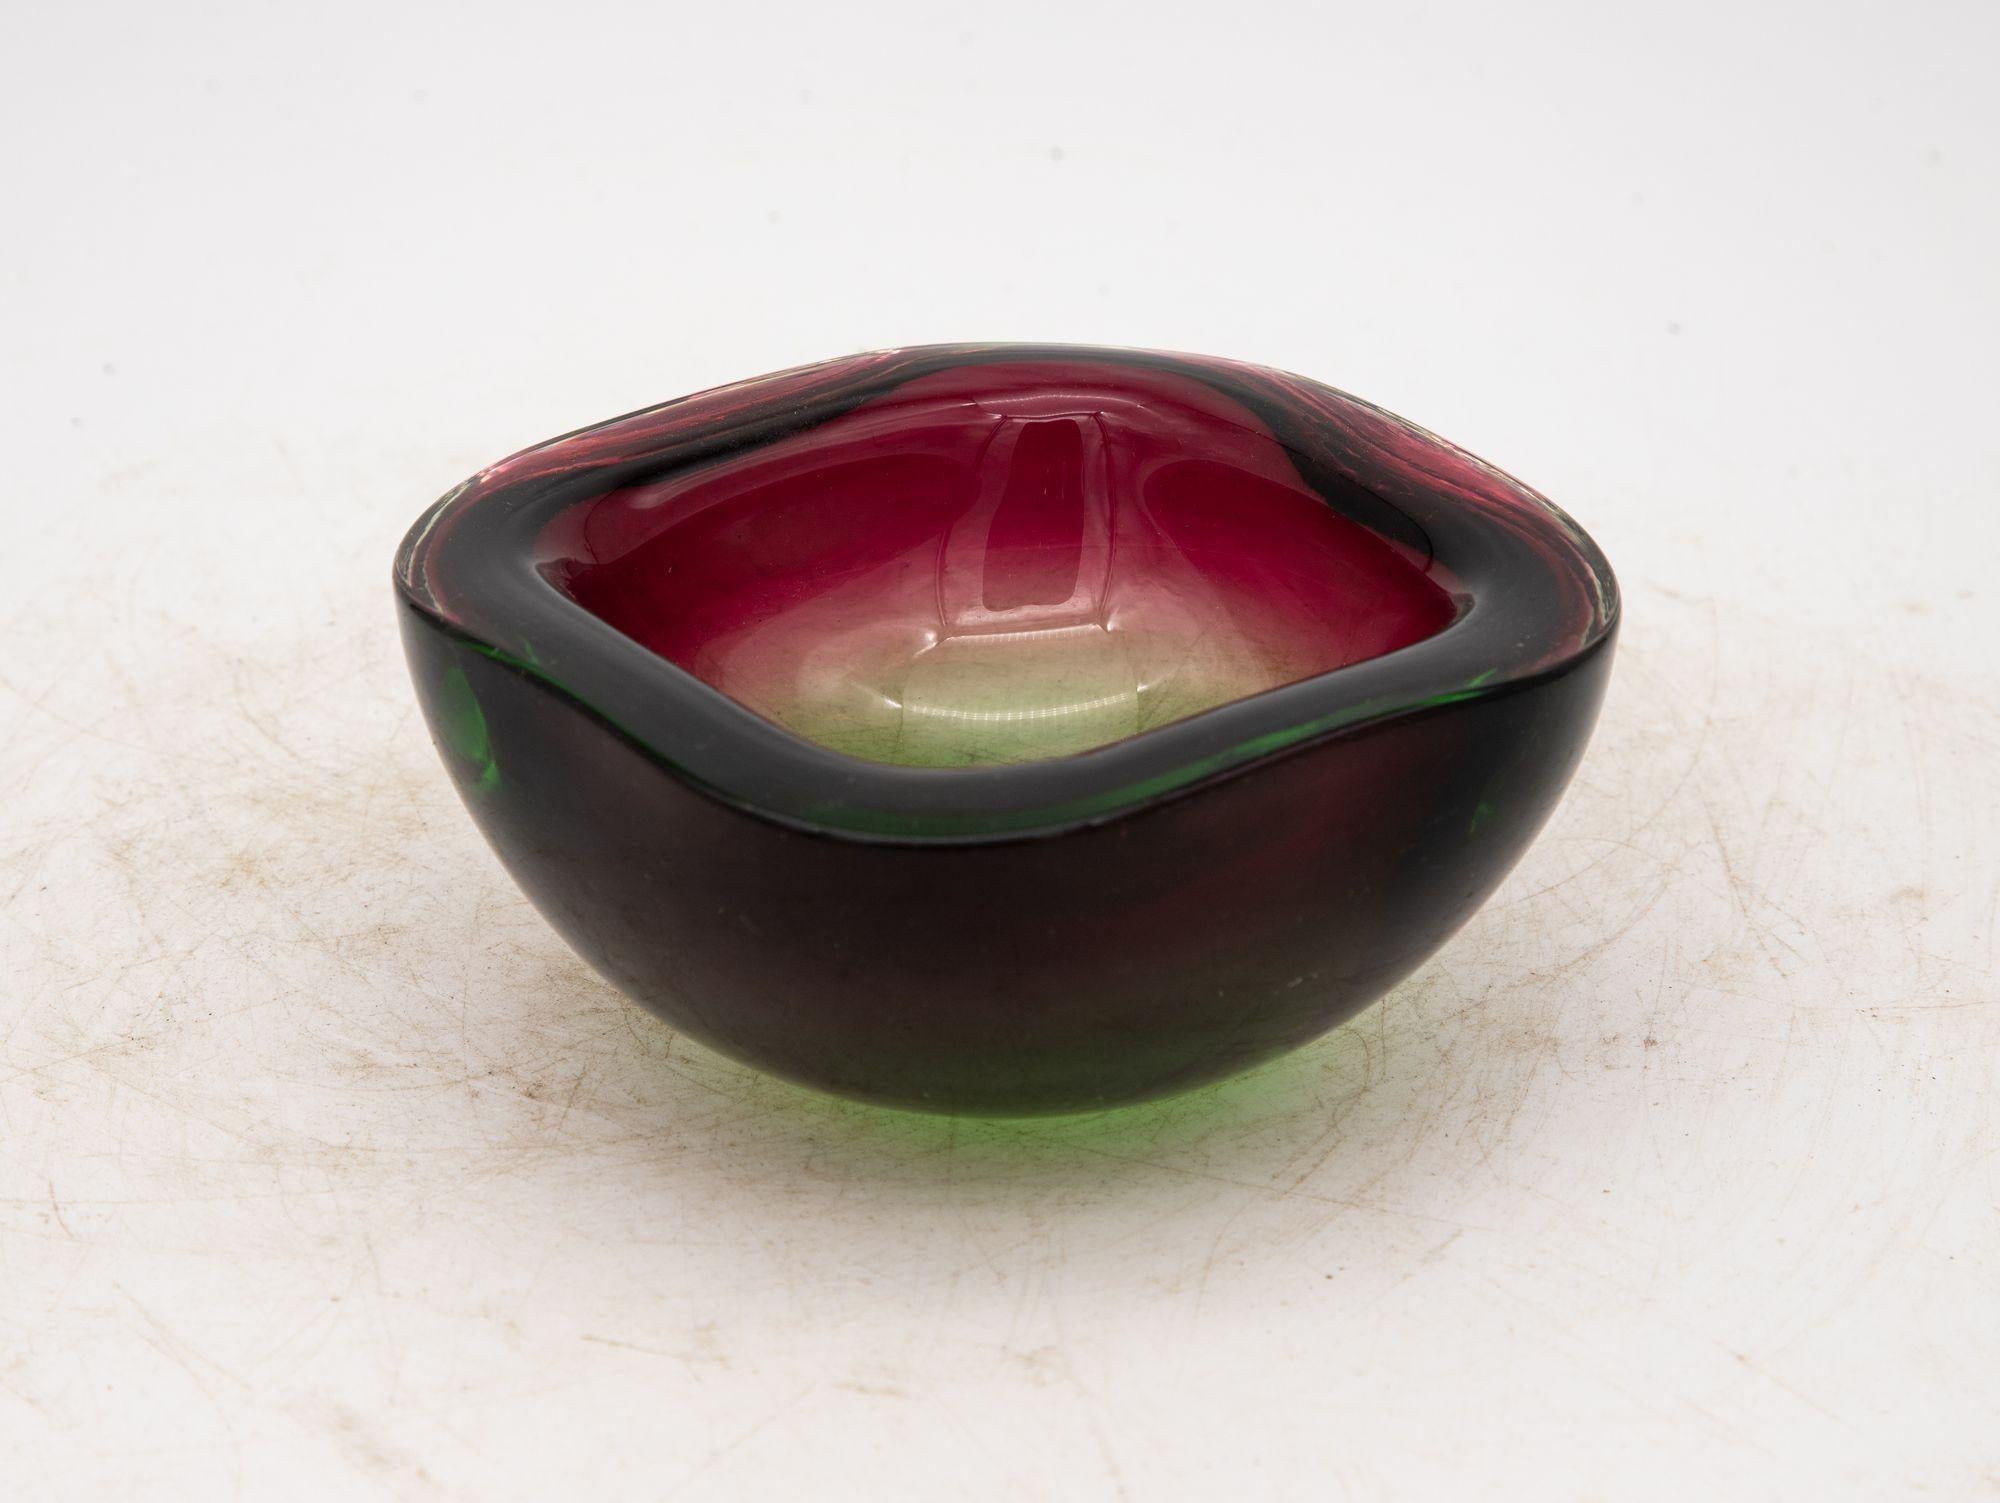 Crafted in the vibrant spirit of the 1960s, this Murano glass ashtray exudes timeless charm. With its square shape and gently rounded corners, the thick glass construction boasts both sturdiness and elegance. The color palette, a mesmerizing